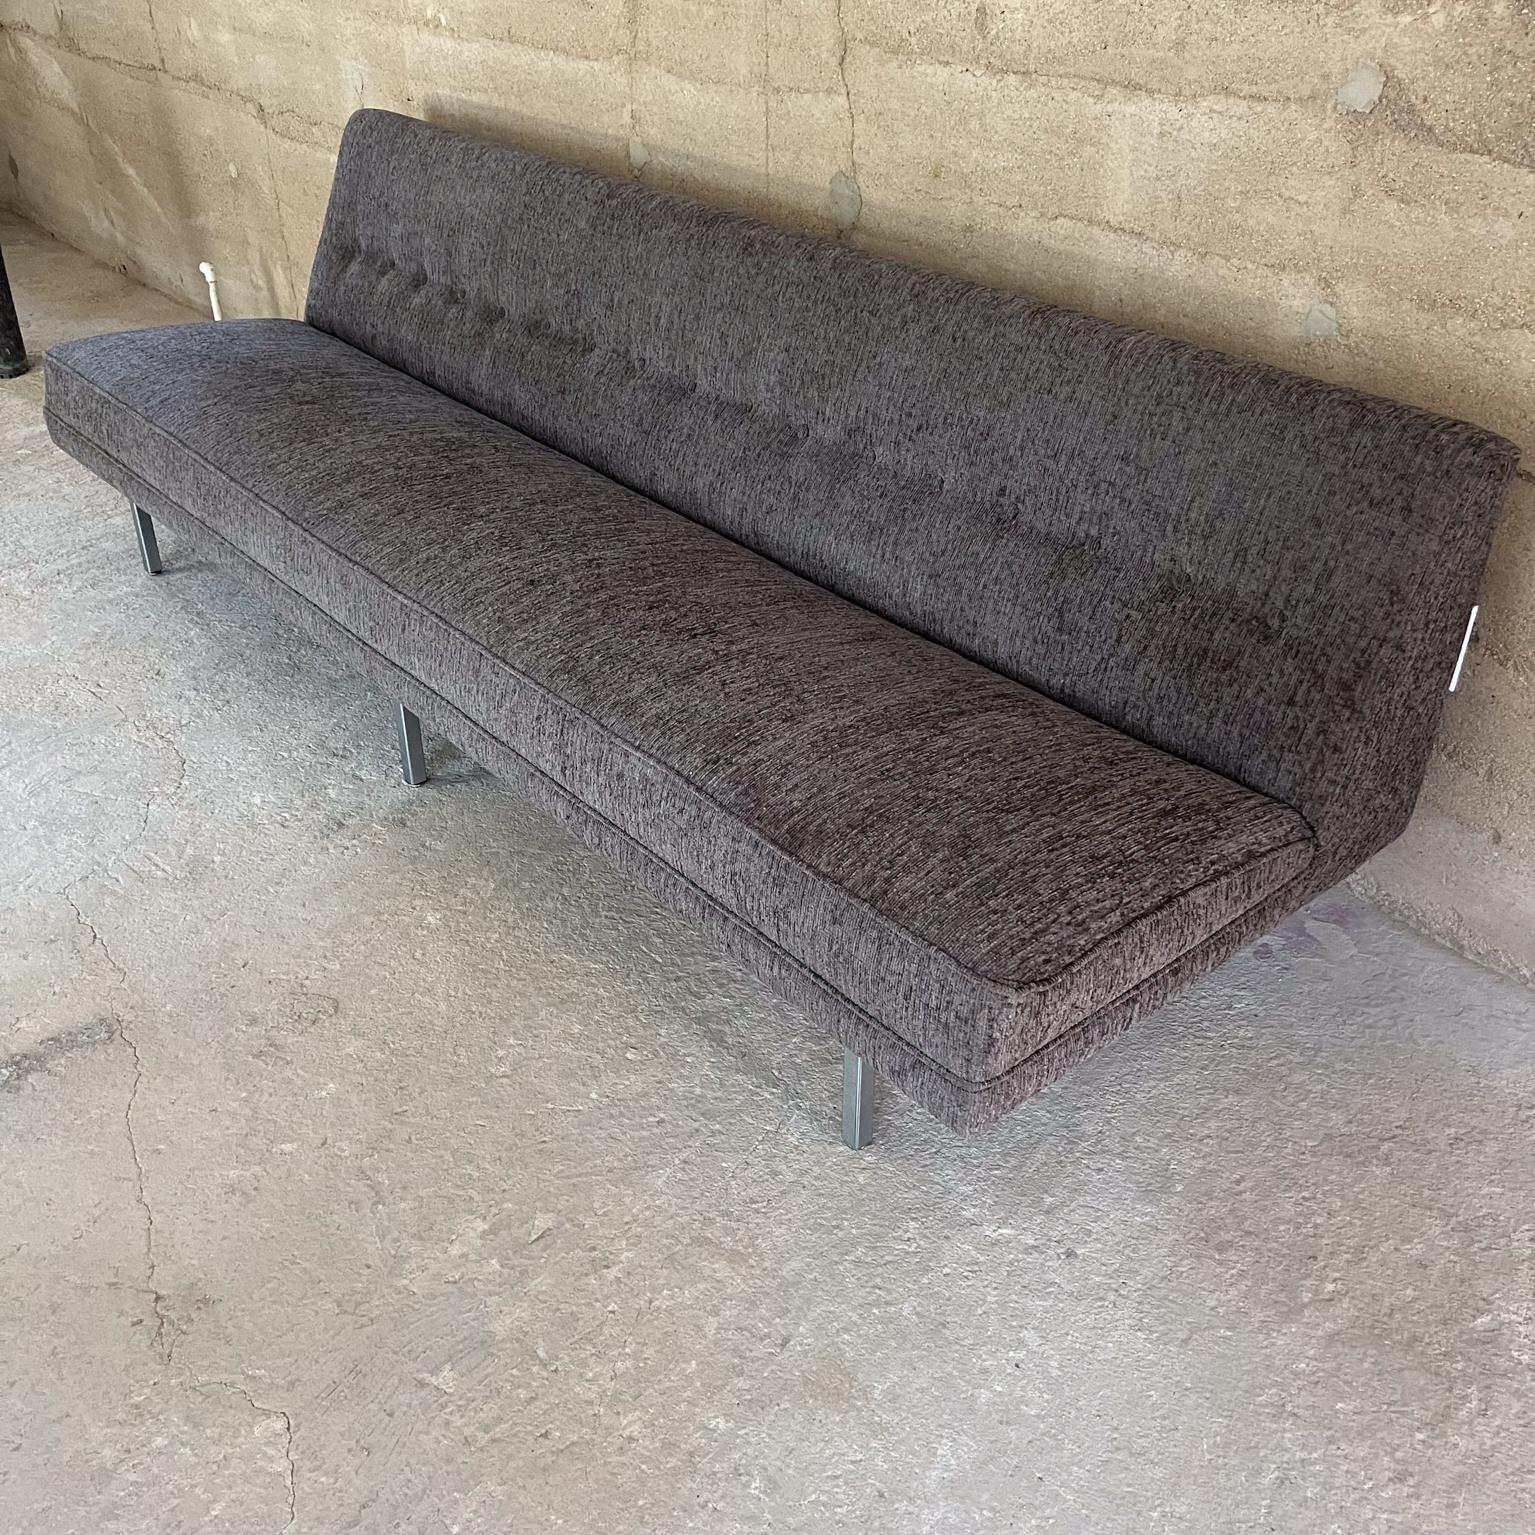 1950s Modern Gray Sofa George Nelson Herman Miller New Upholstery In Good Condition For Sale In Chula Vista, CA